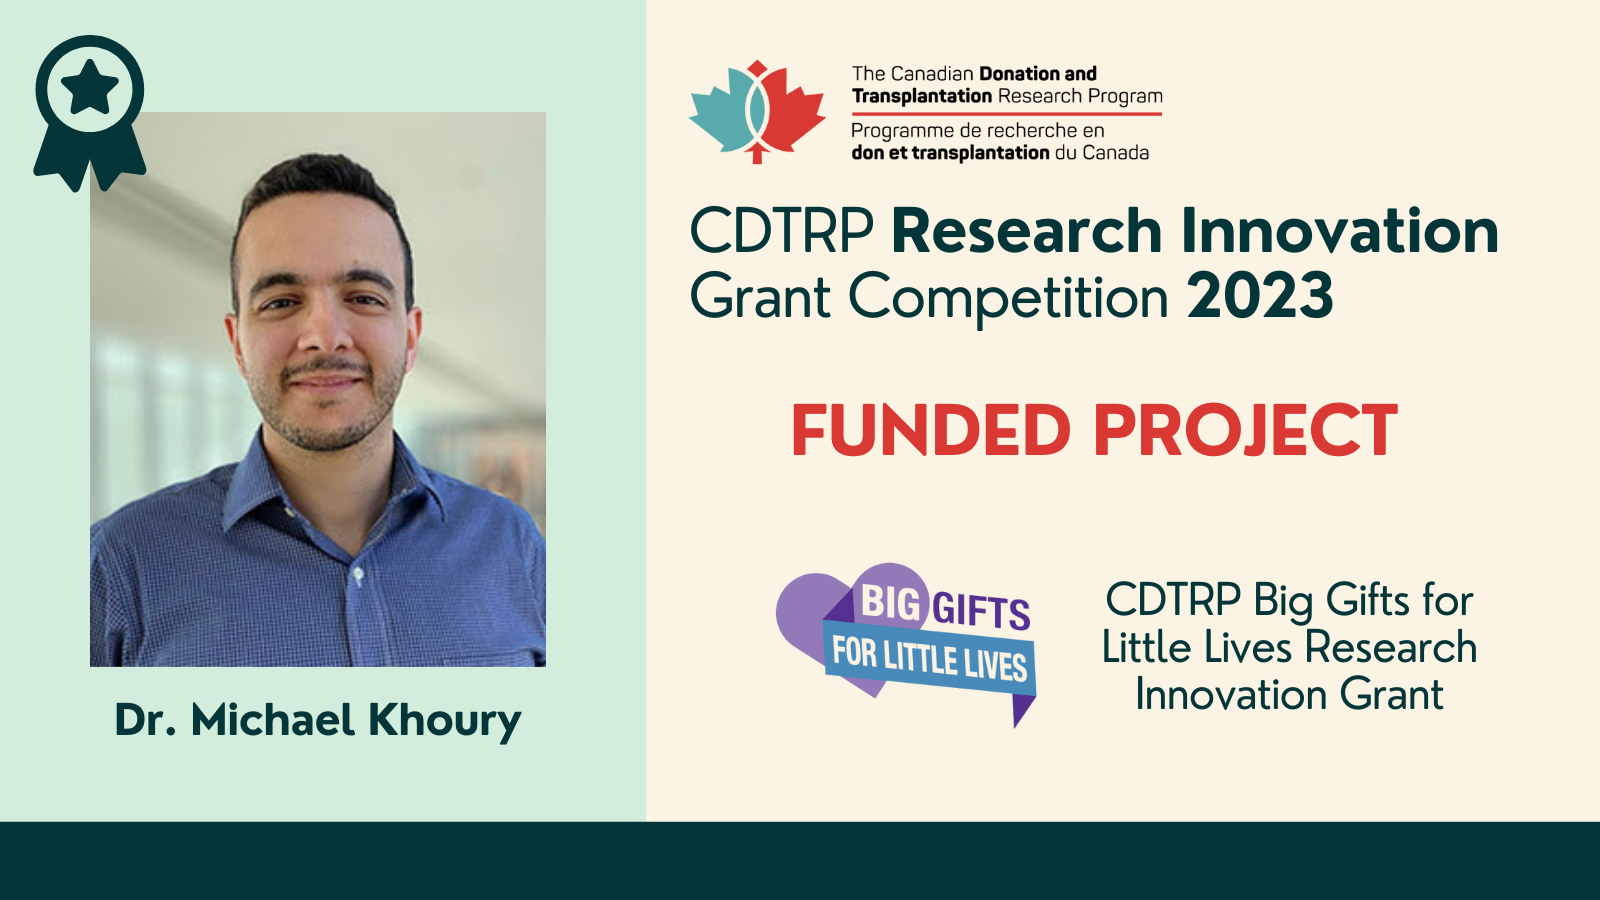 CDTRP Big Gifts for Little Lives Research Innovation Grant Dr